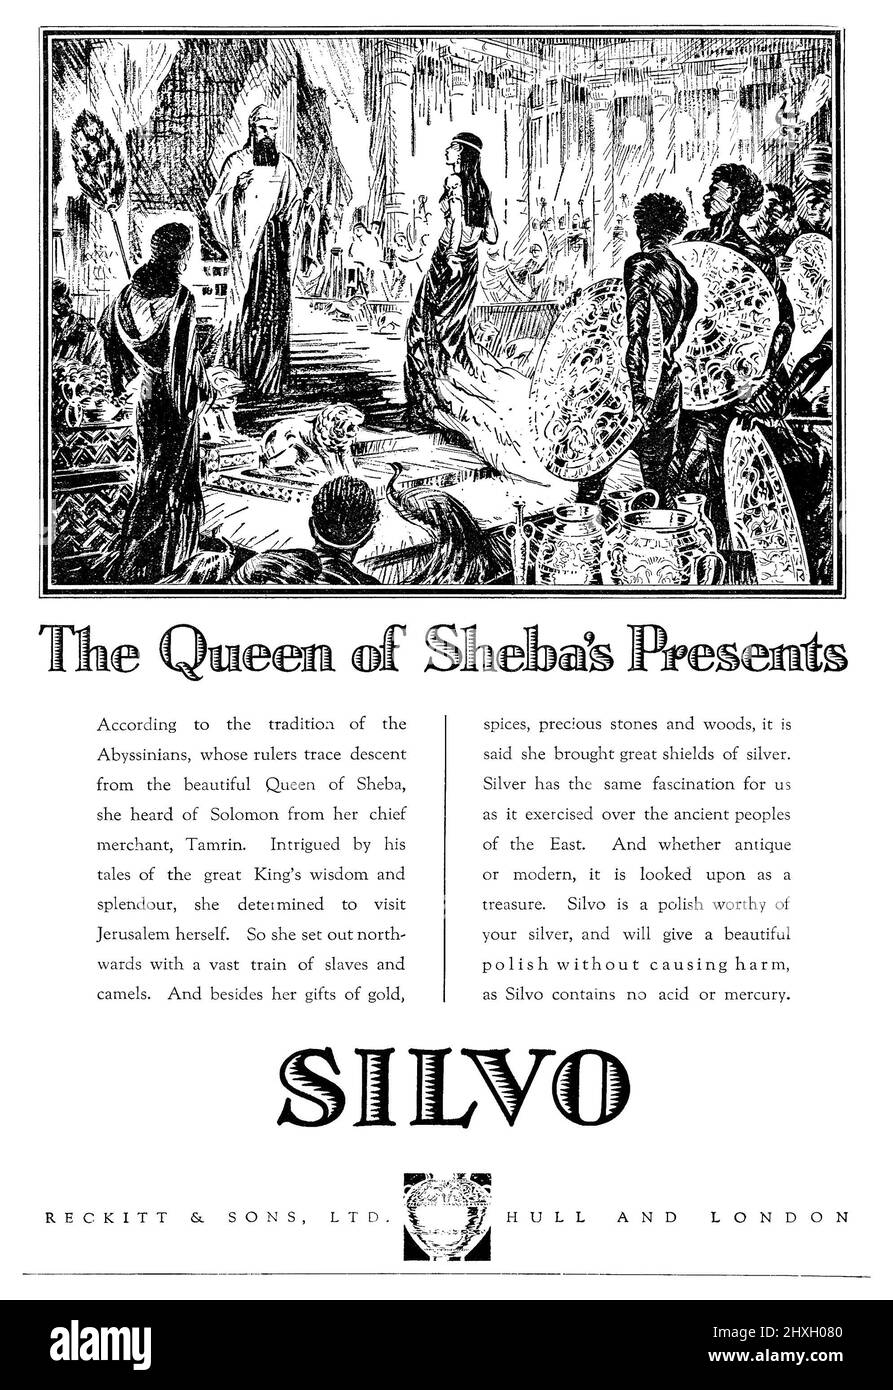 1930 British advertisement for Silvo silver polish by Reckitt & Sons. Stock Photo